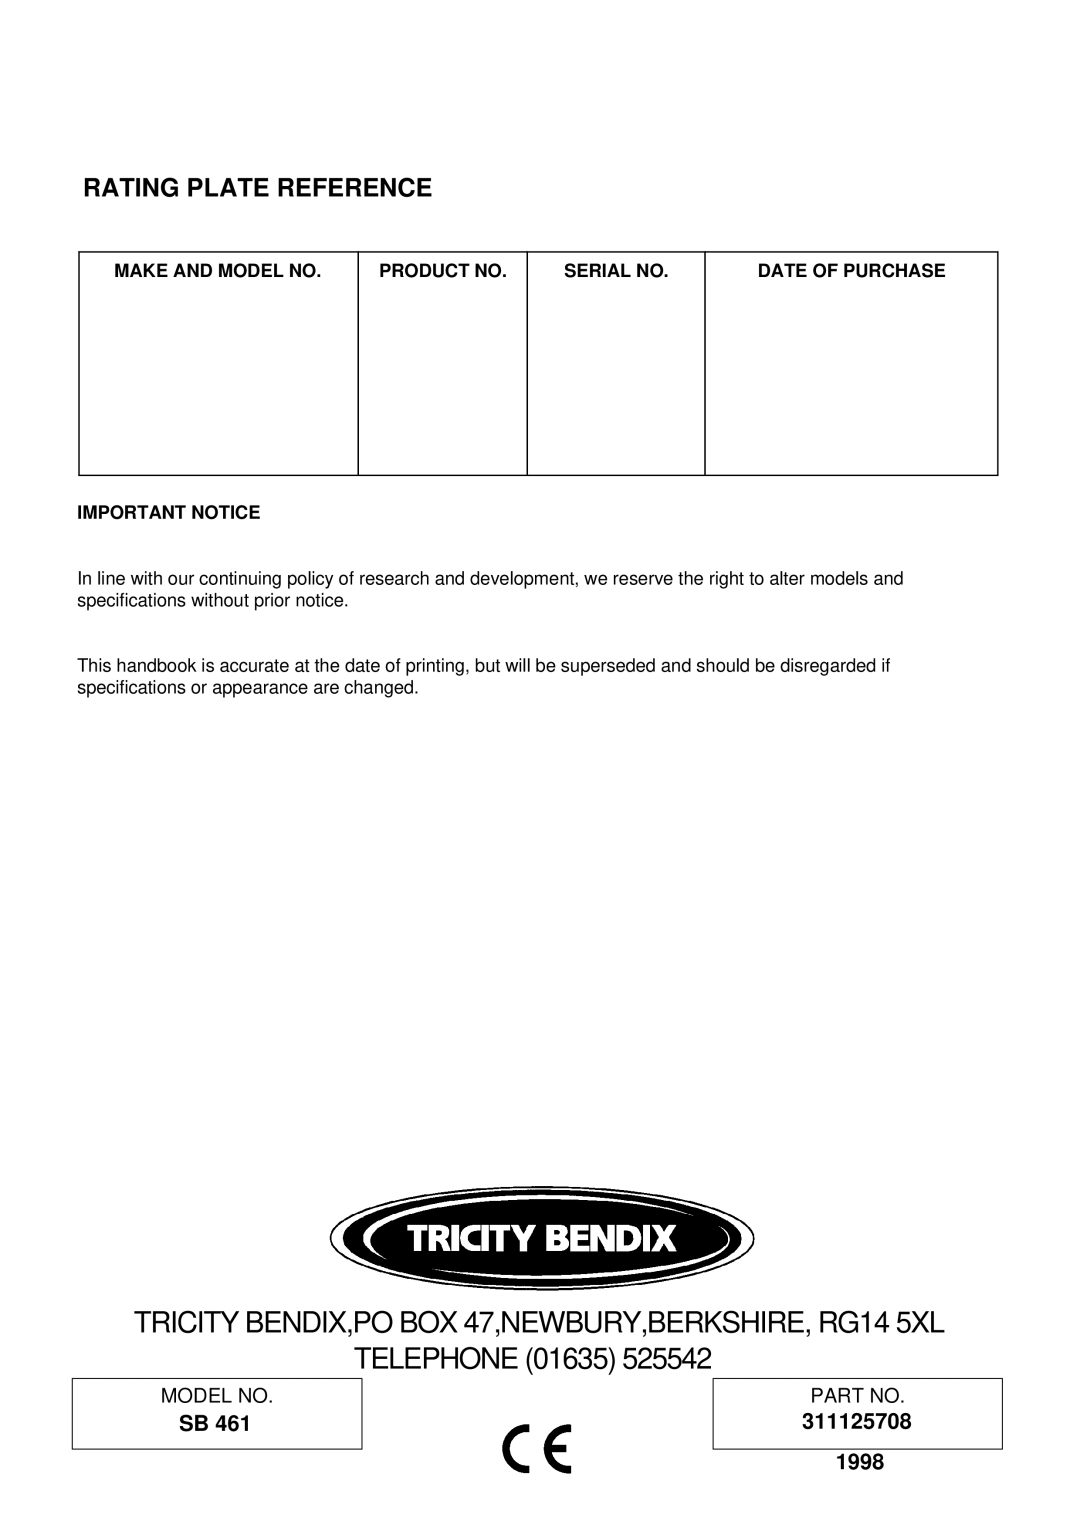 Tricity Bendix SB 461 installation instructions Rating Plate Reference 